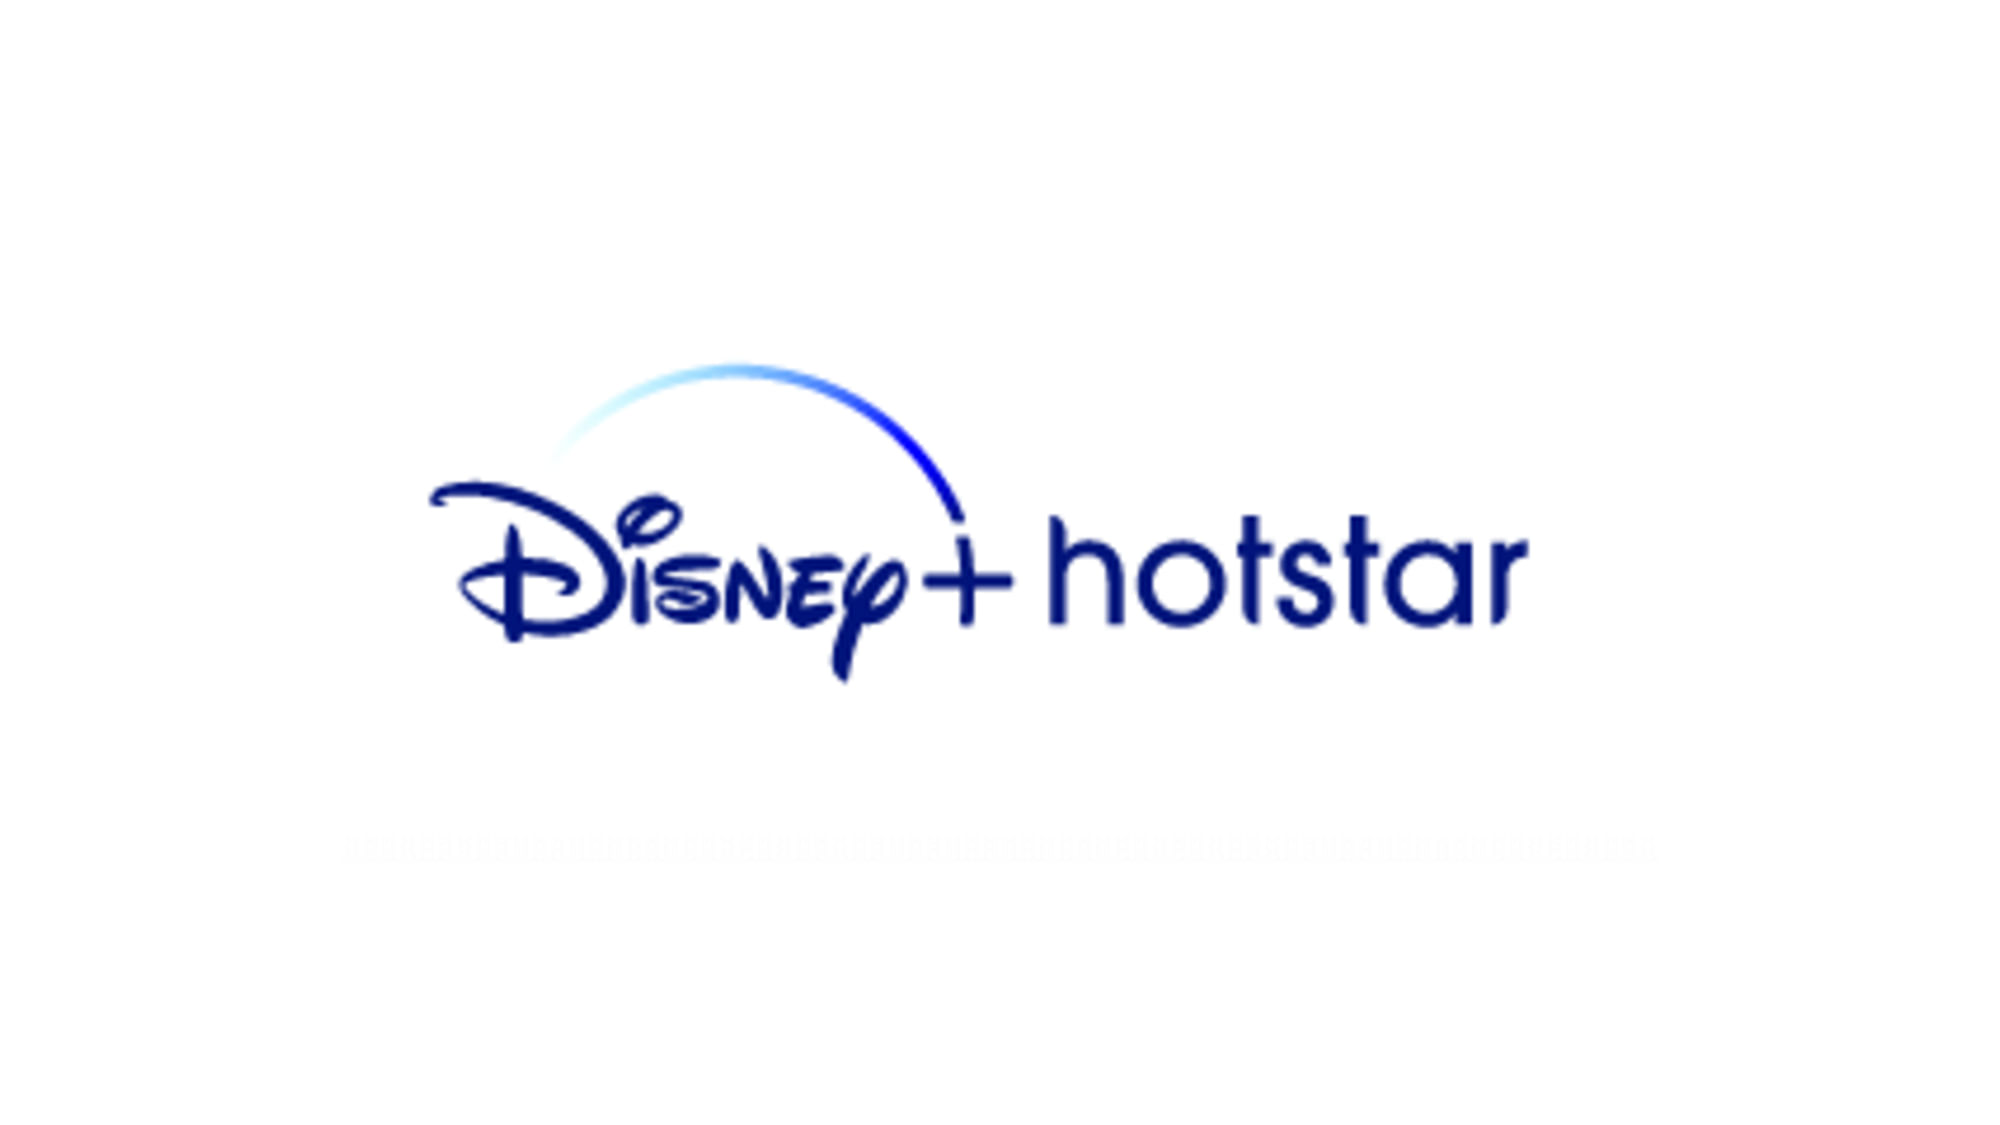 Hotstar reported 300 million monthly active users last year. Most use the free, advertising-supported service, but Disney has said it aims to convert many of these users into paying subscribers.